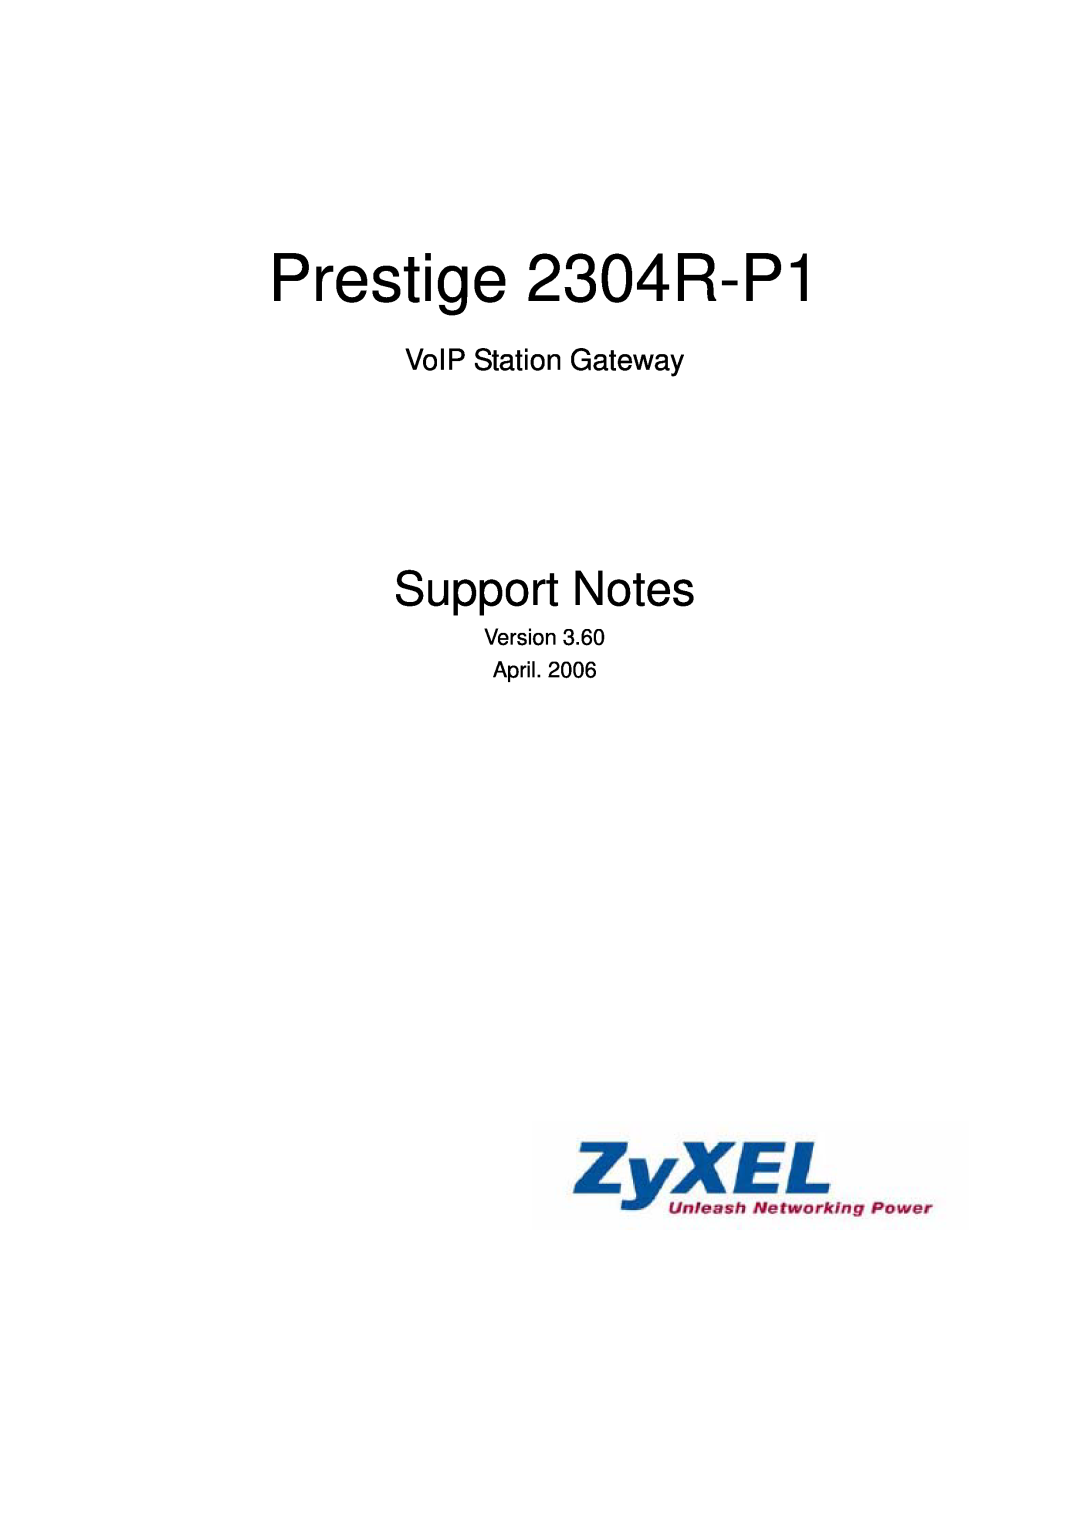 ZyXEL Communications manual Prestige 2304R-P1, Support Notes, VoIP Station Gateway 